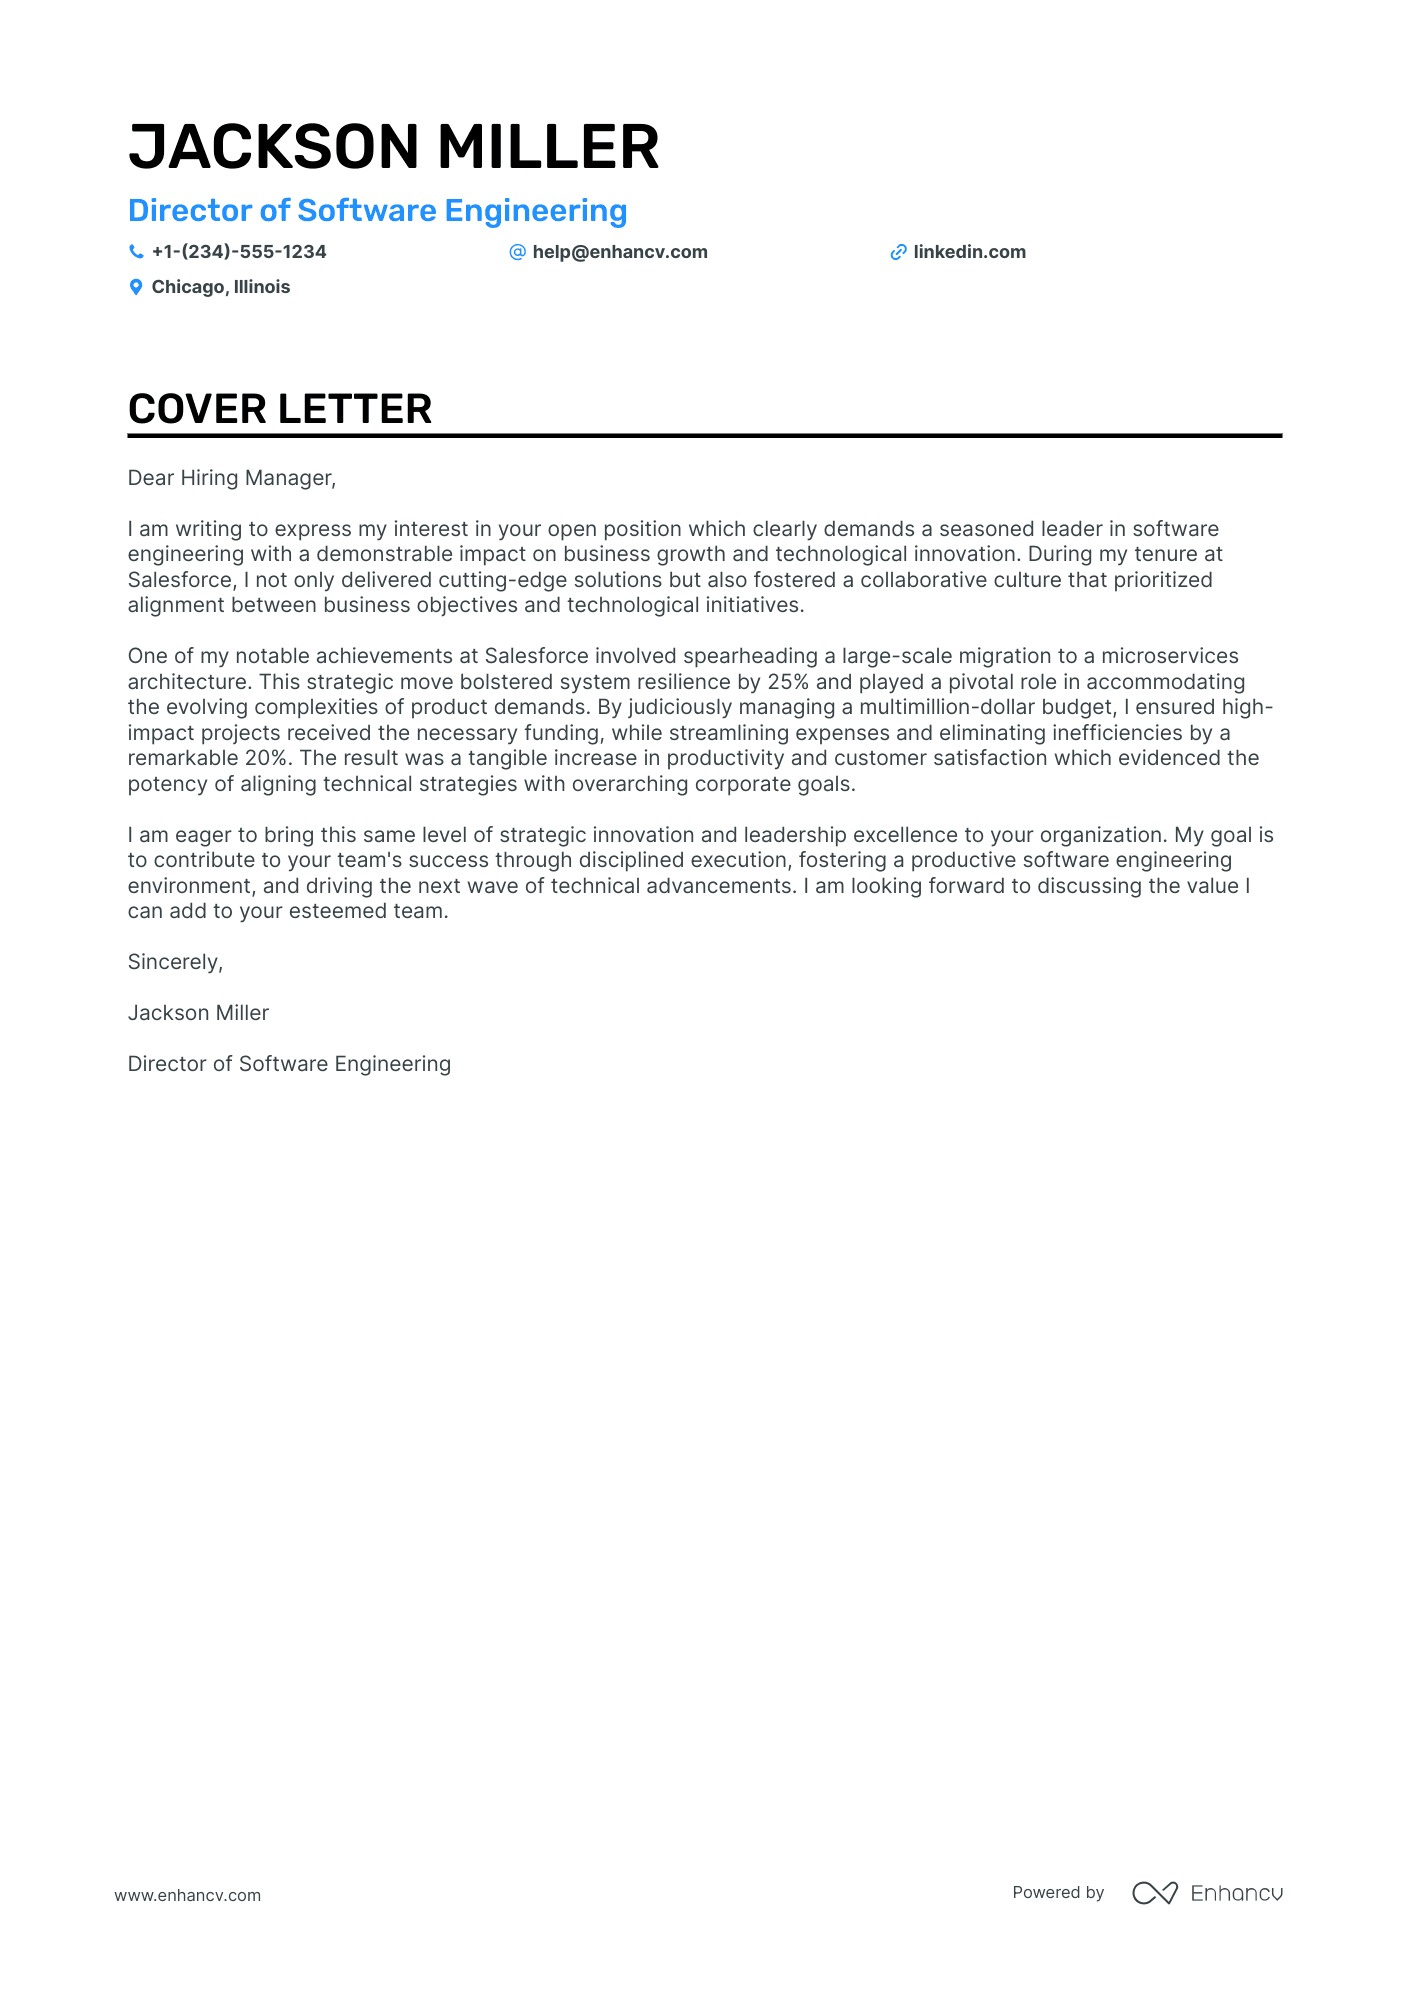 Director of Software Engineering cover letter